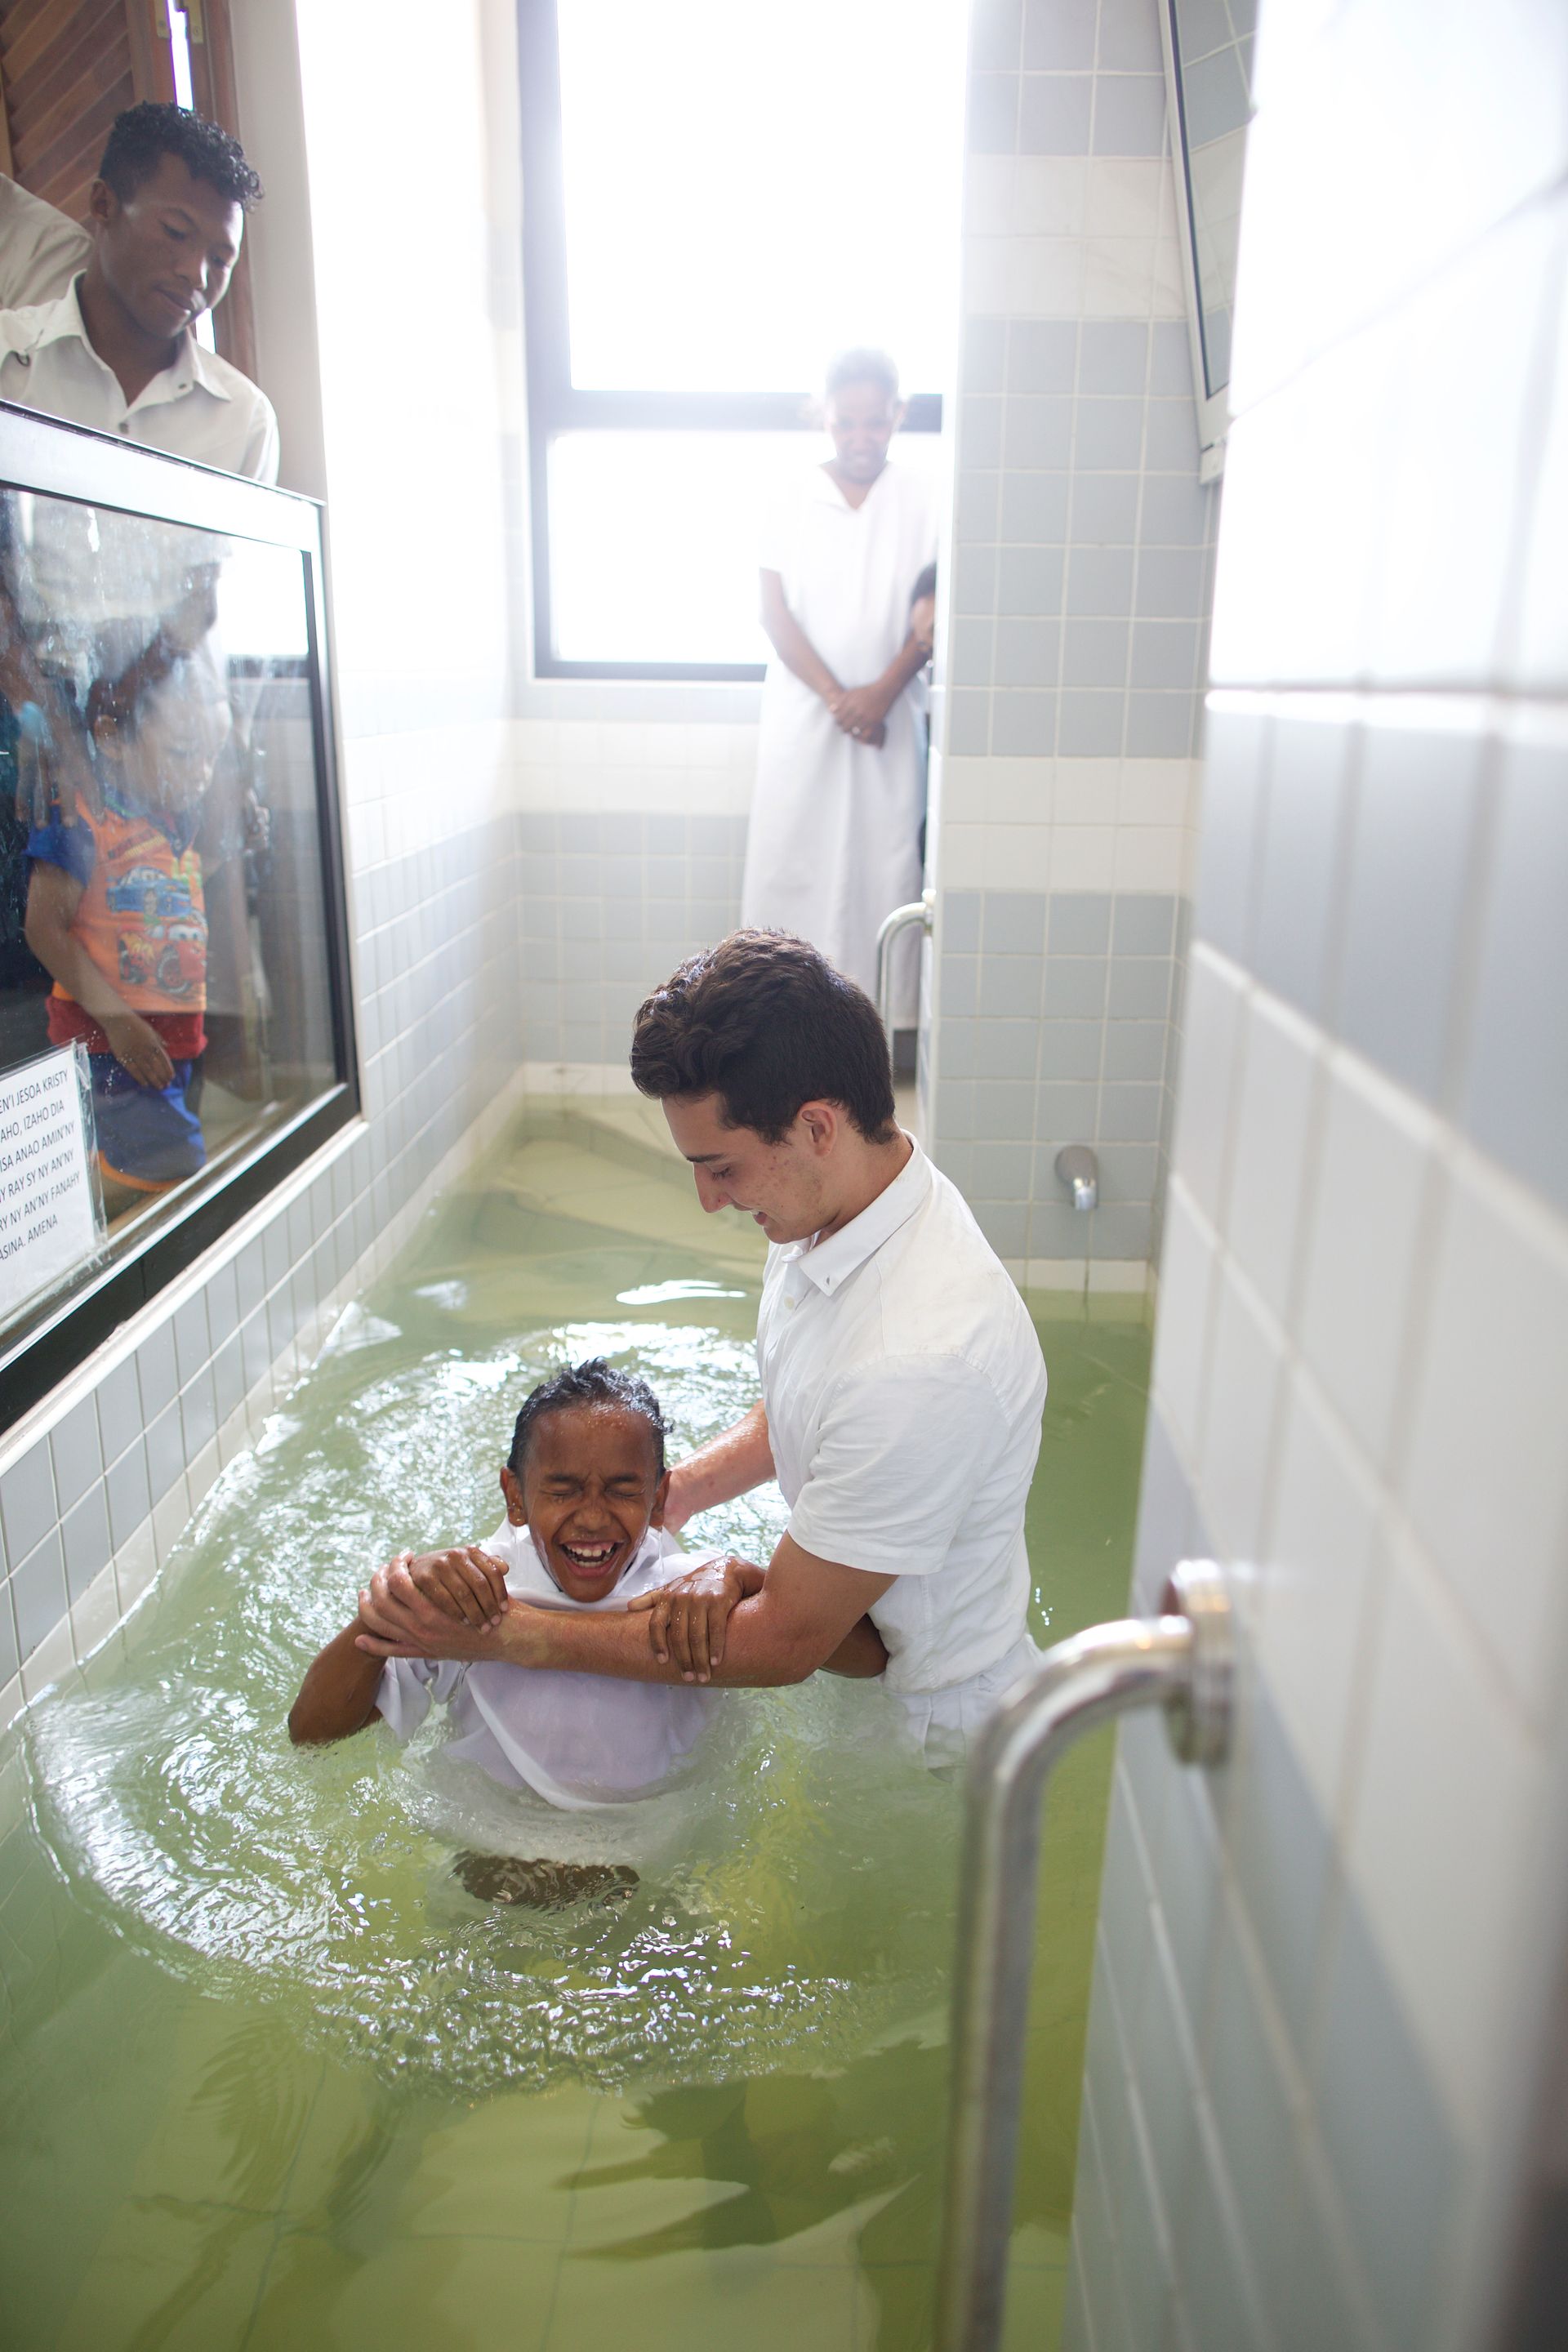 A young boy being baptized in a baptismal font in Madagascar.